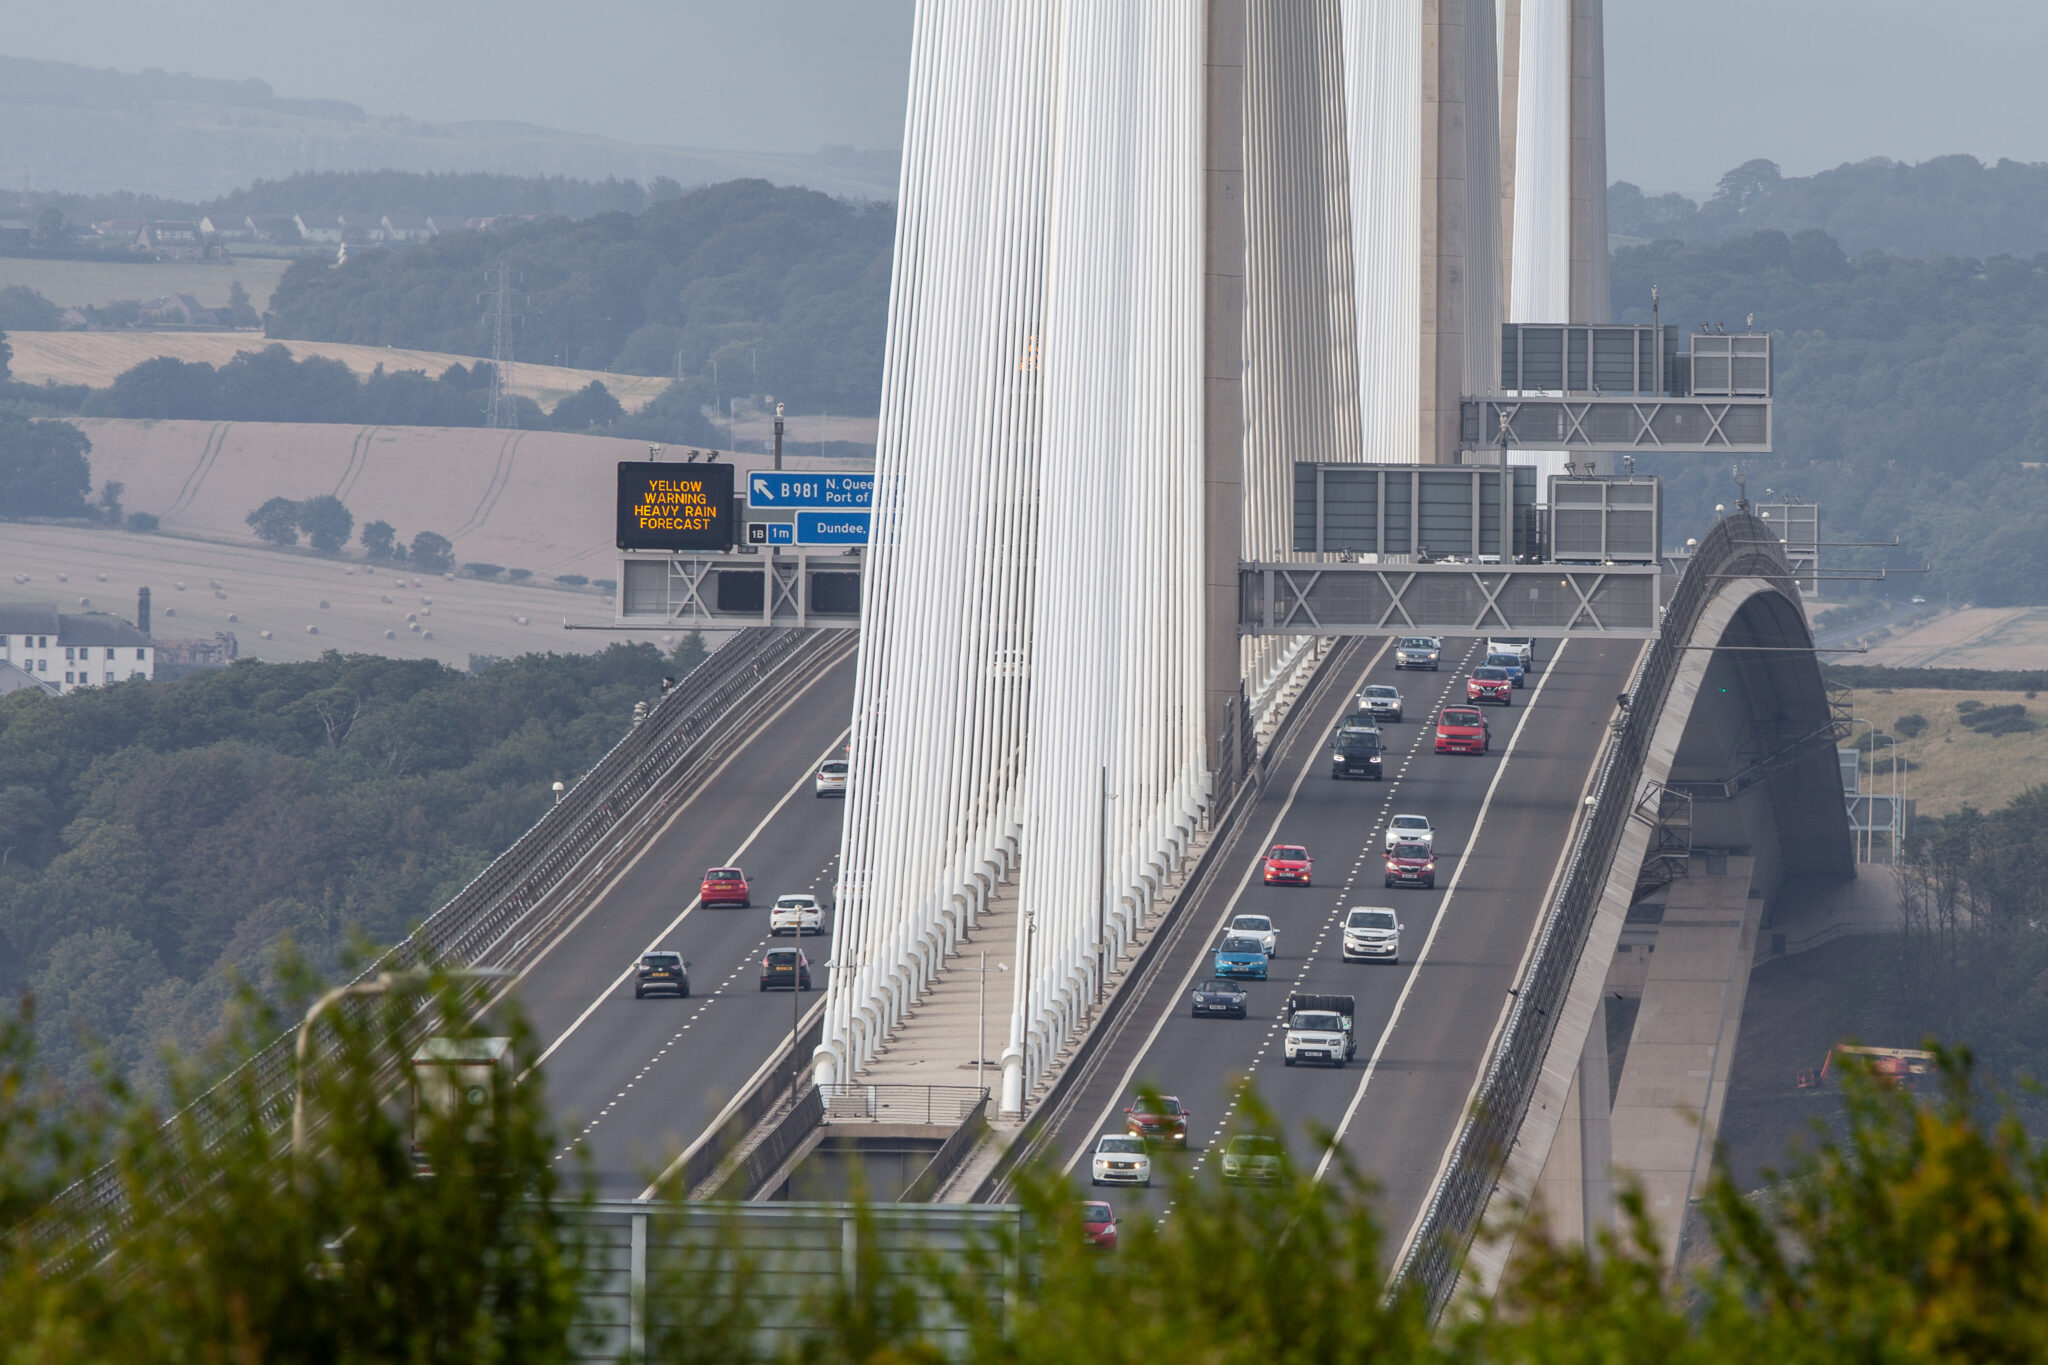 QUEENSFERRY CROSSING REOPENED TO TRAFFIC